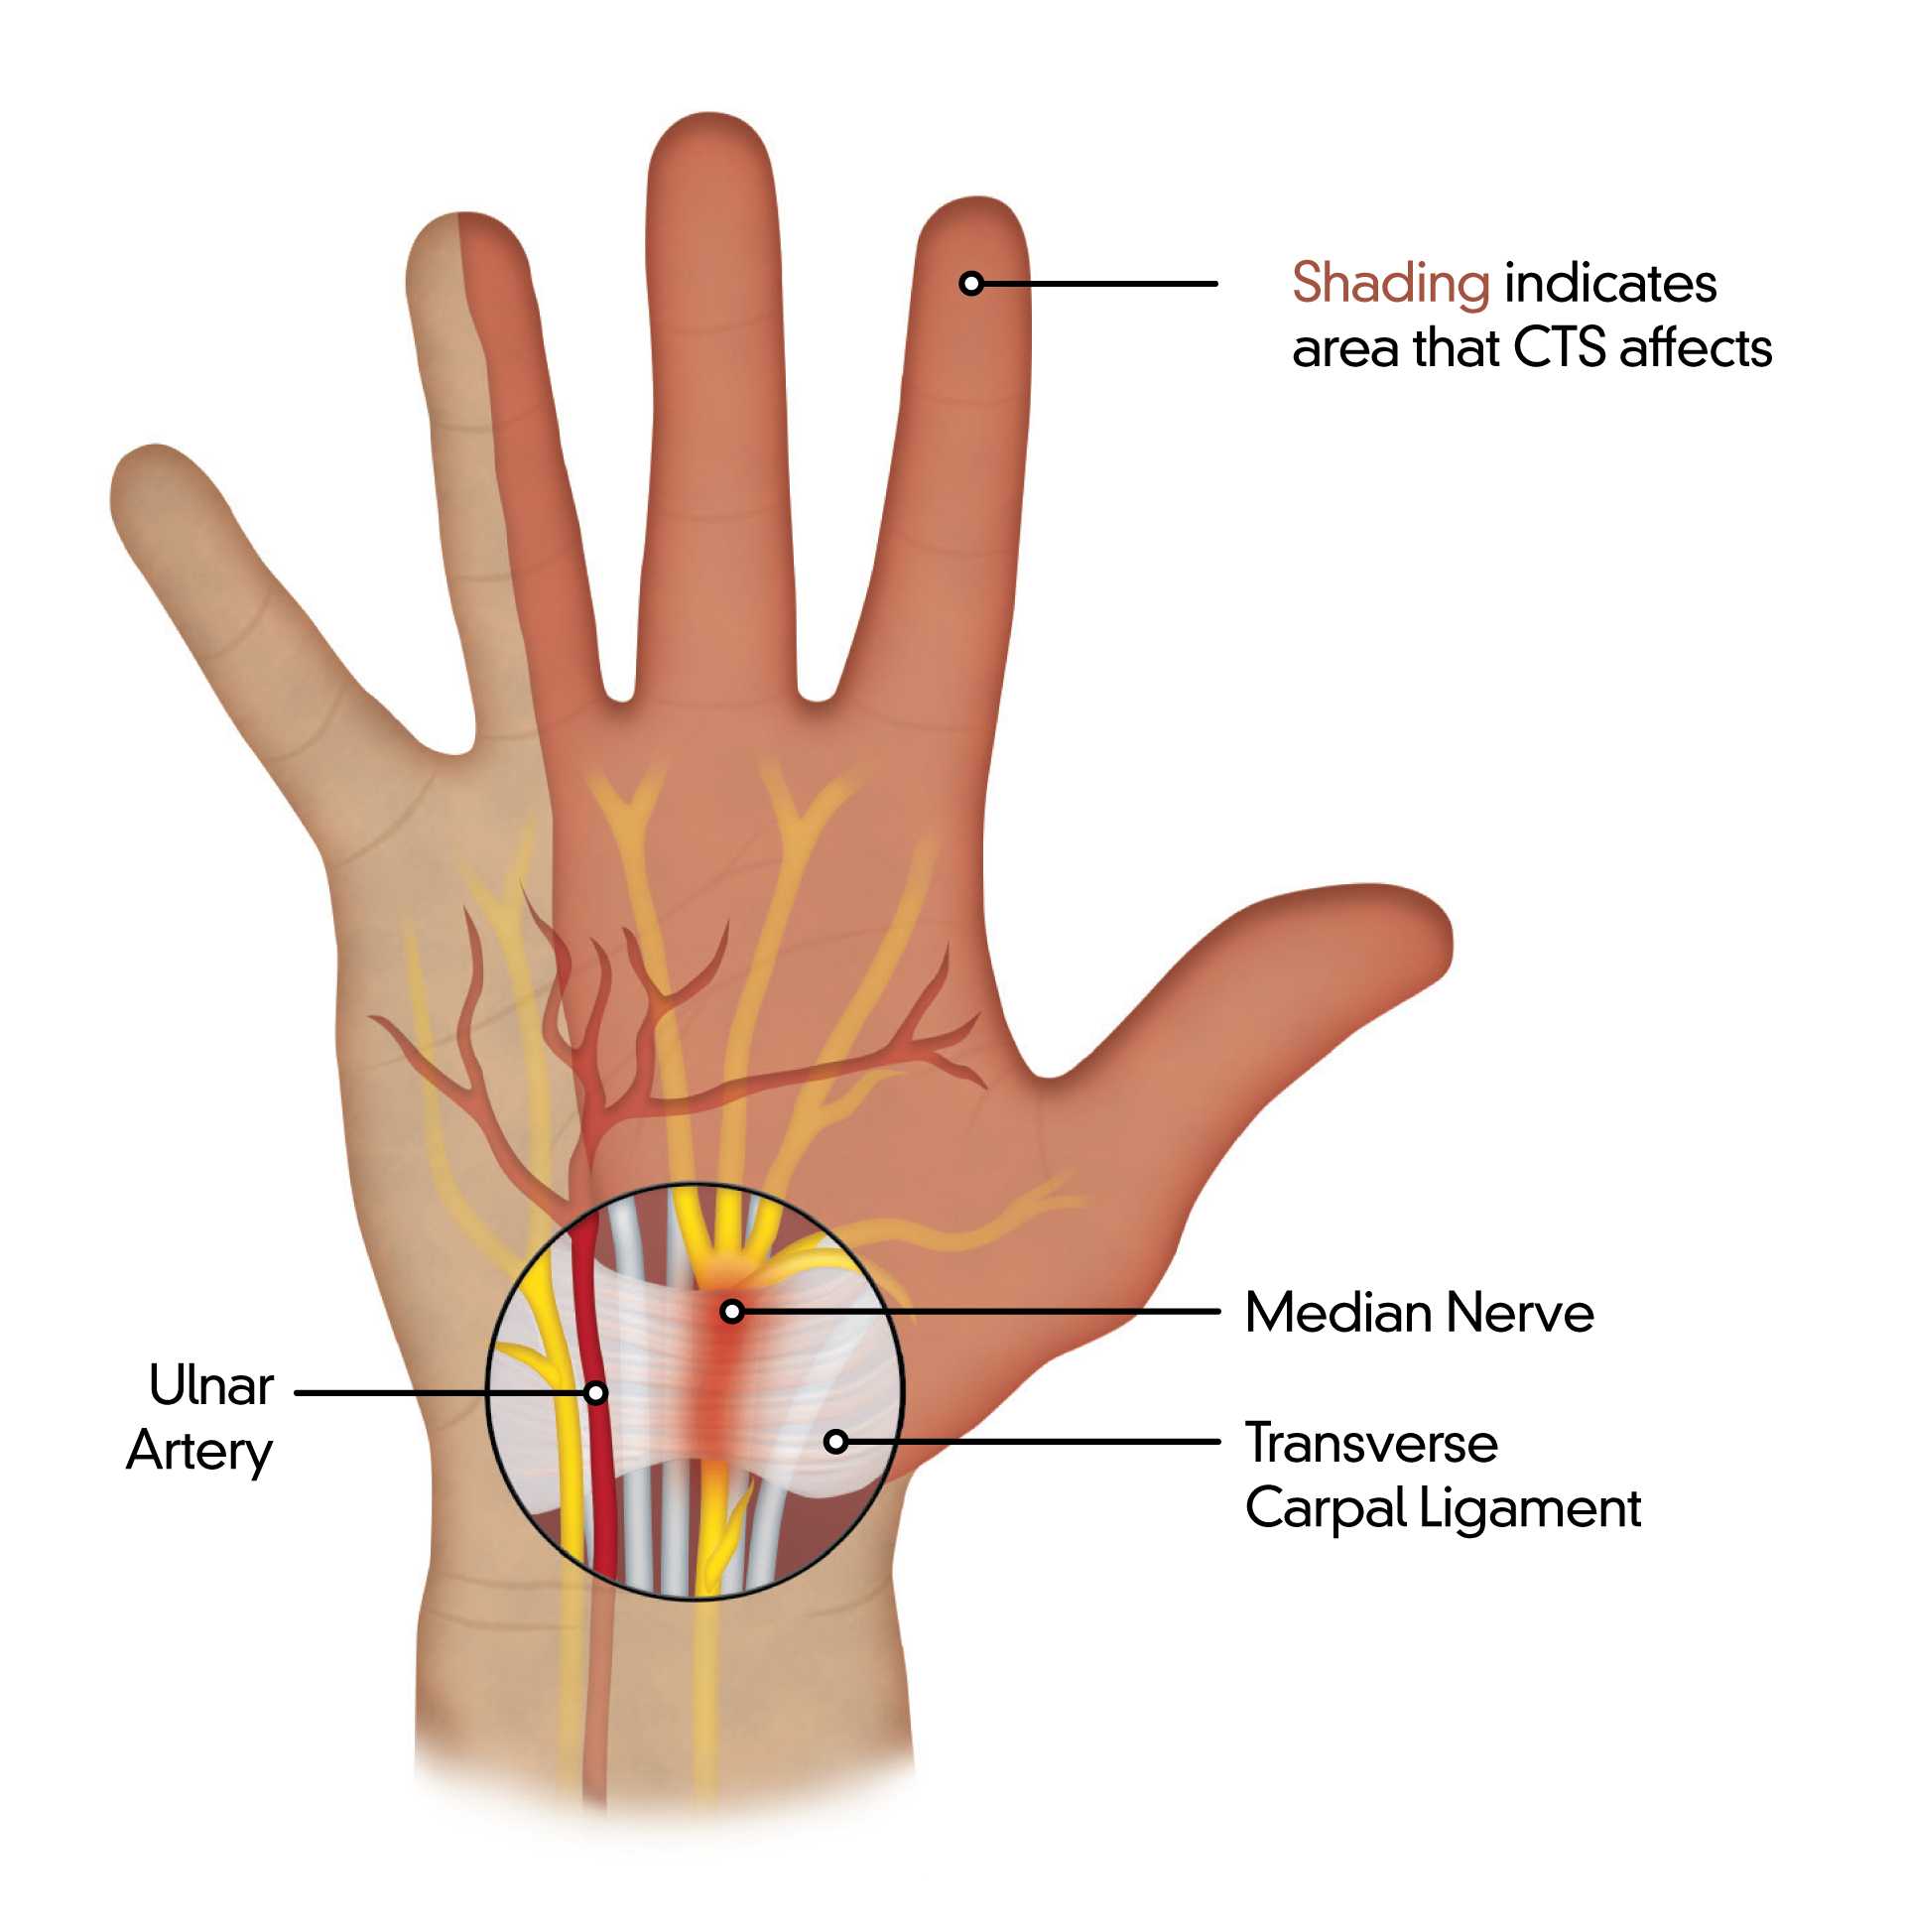 3 Non-Surgical Treatments for Carpal Tunnel Syndrome